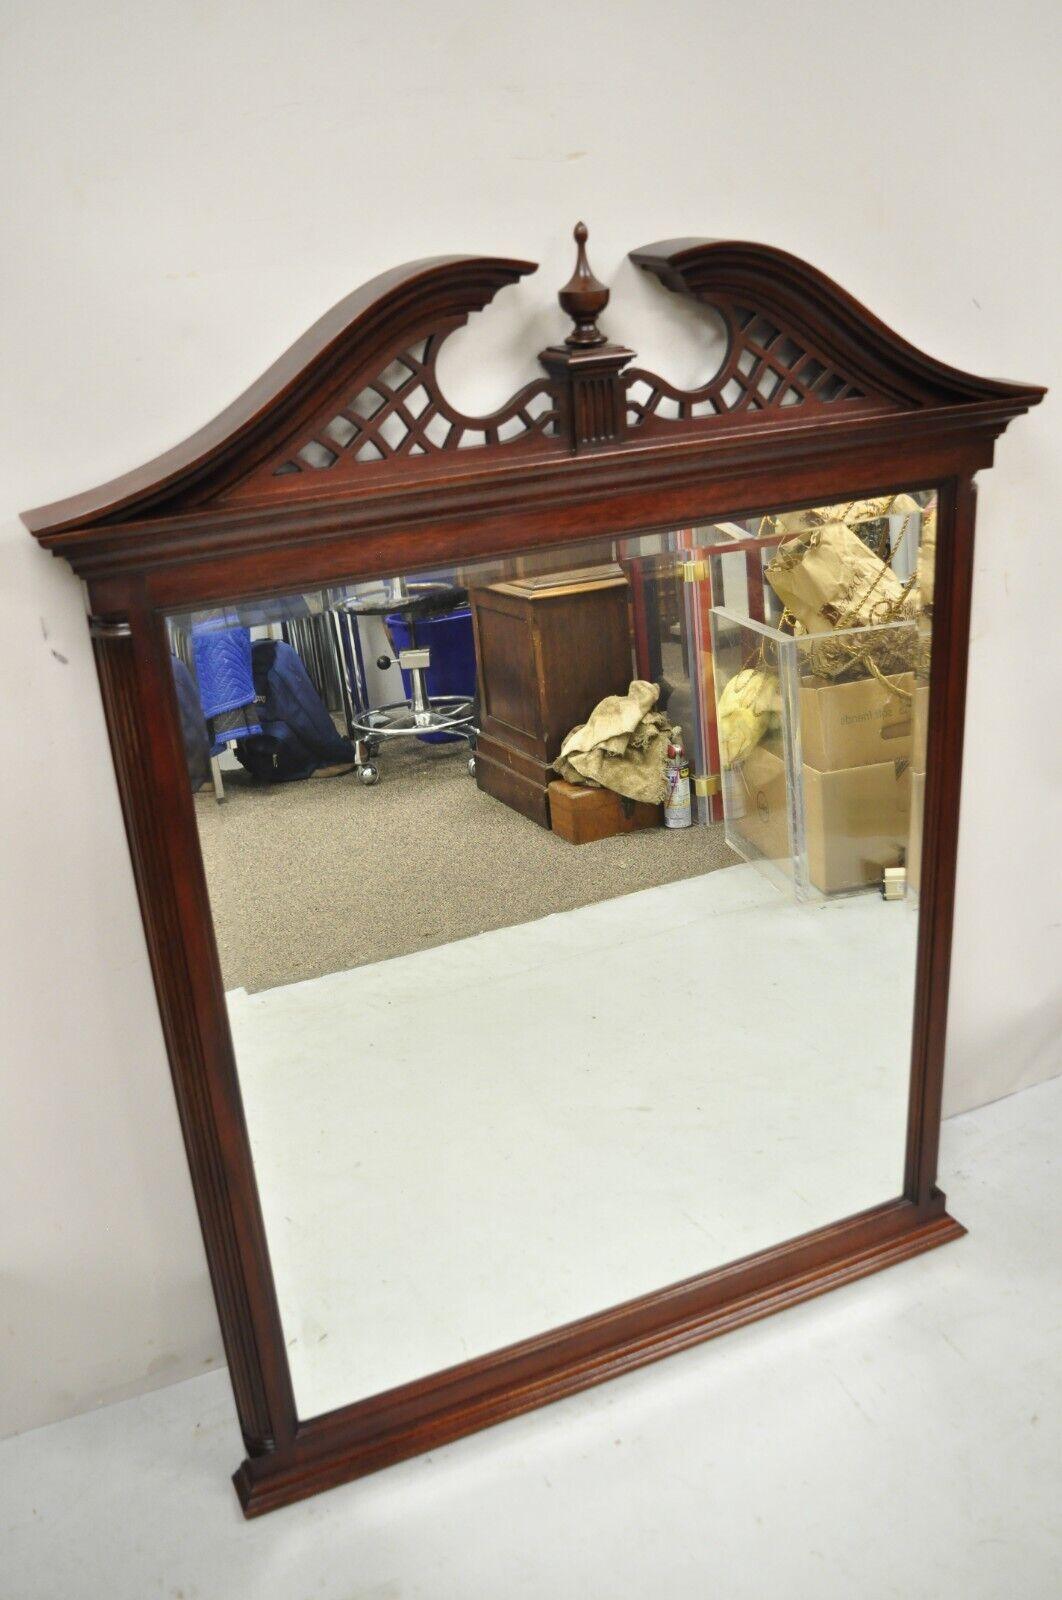 Pennsylvania House Mahogany Beveled Glass Chippendale Dresser Mirror with Finial. Item features a solid wood frame, beautiful wood grain, nicely carved details, original stamp, beveled glass, quality American craftsmanship. Circa Late 20th Century.